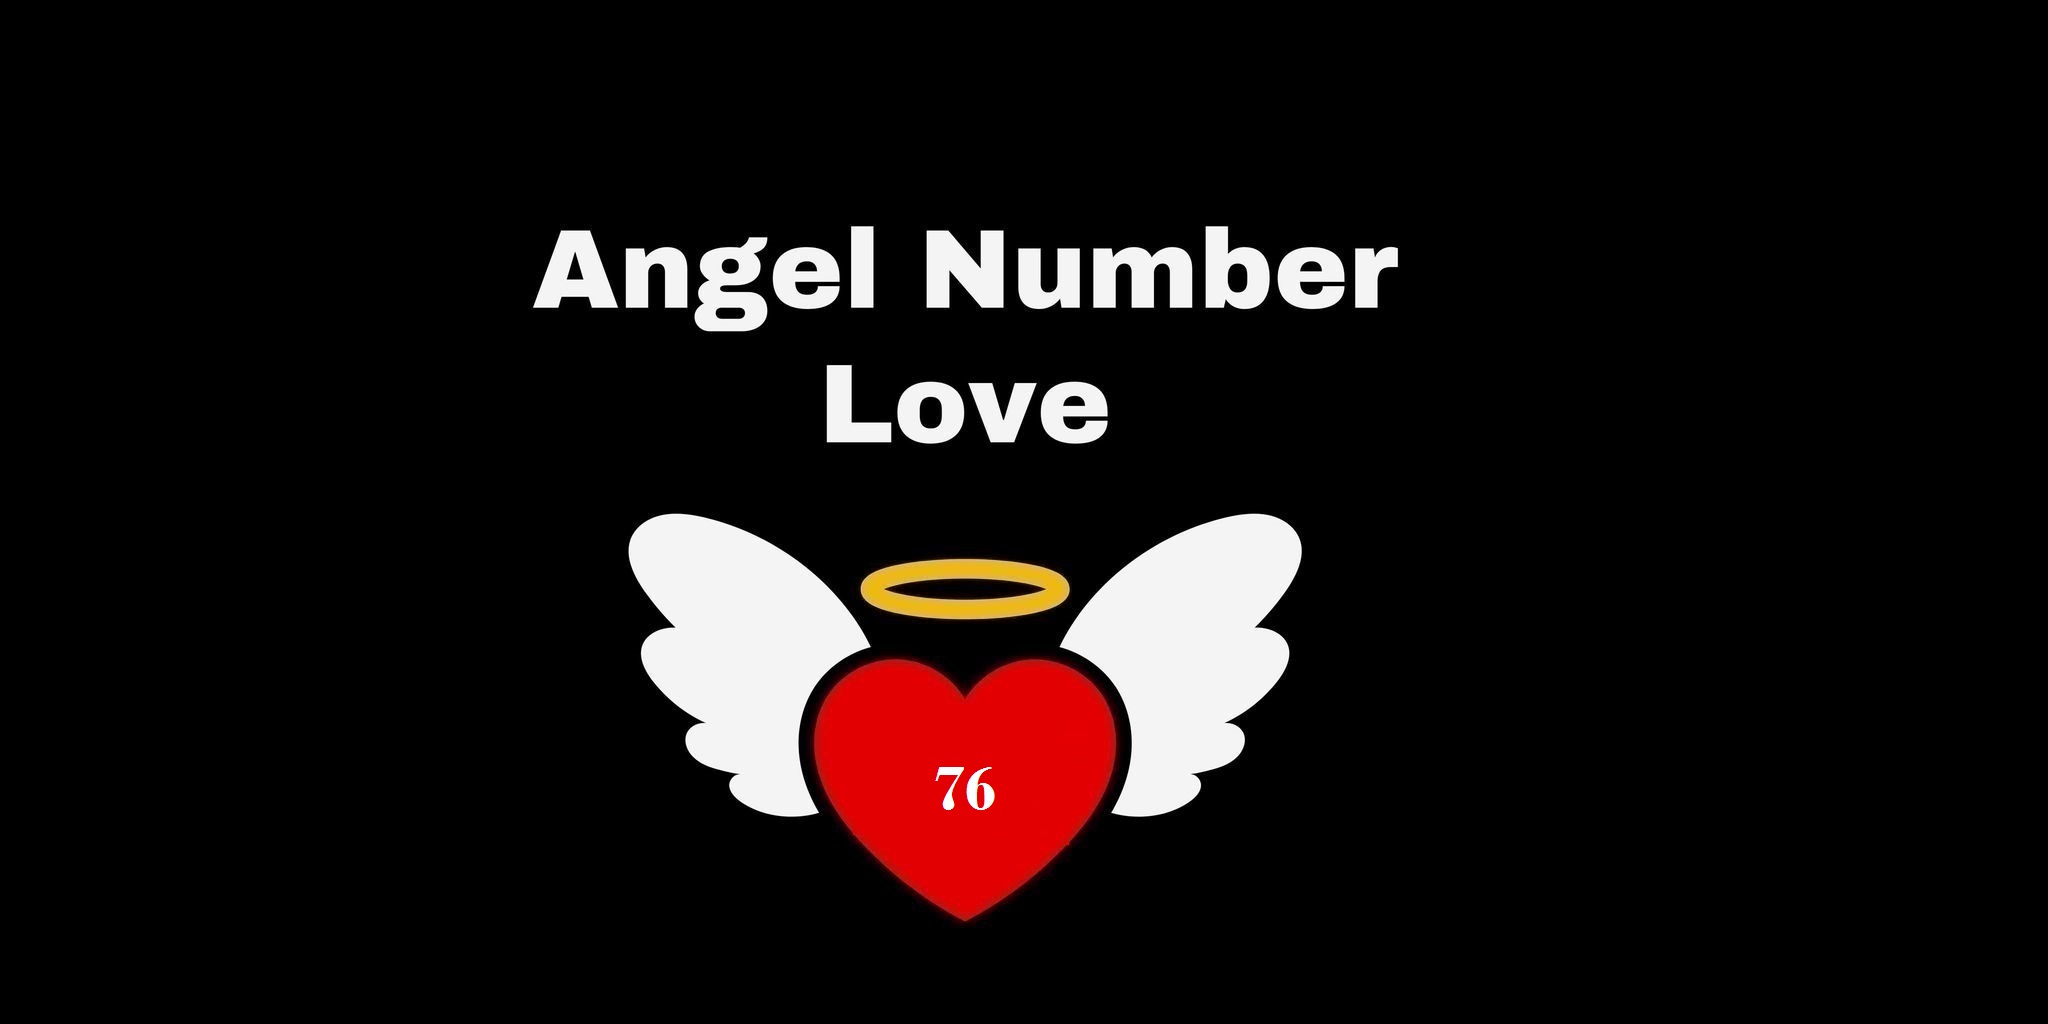 76 Angel Number Meaning In Love